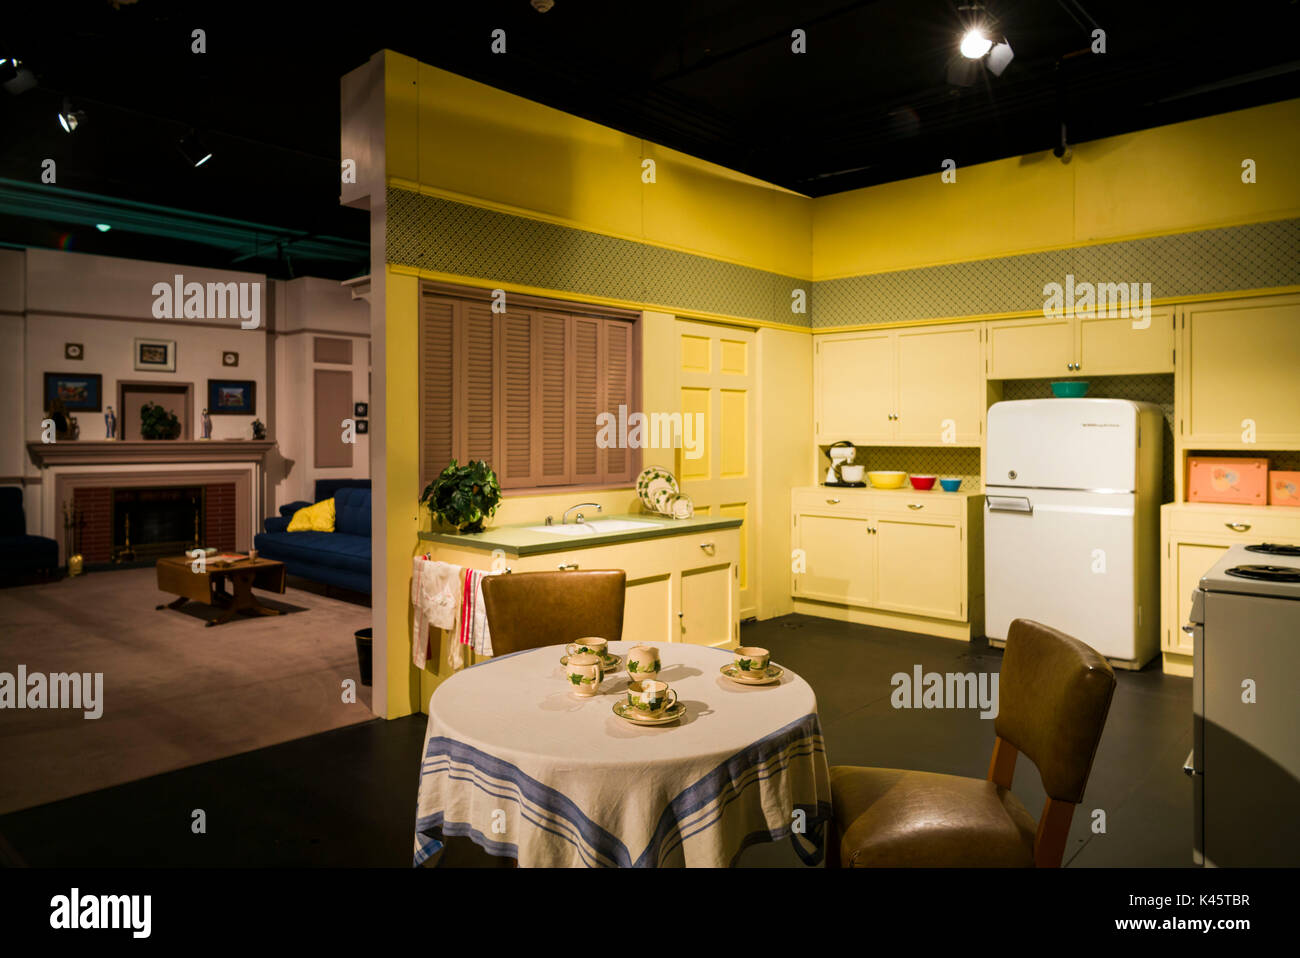 USA, New York, Western New York, Jamestown, Lucy-Desi Museum, dedicated to comedy star Lucille Ball of the 1950s-era TV show, I Love Lucy, kitchen set Stock Photo